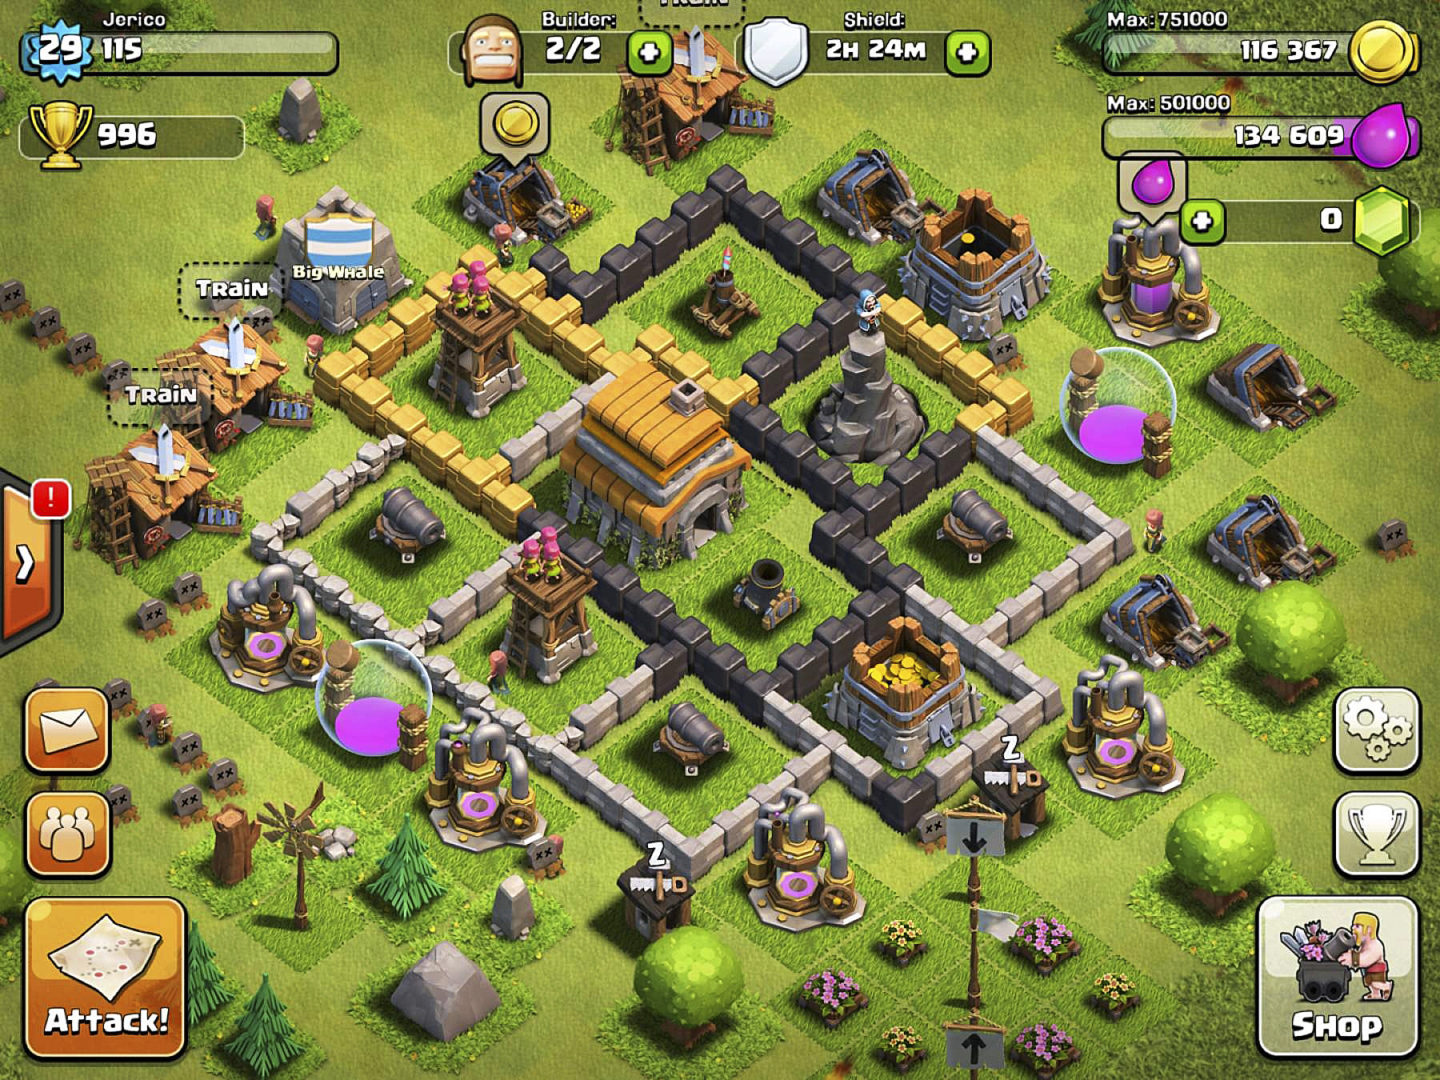 Clans of clans download